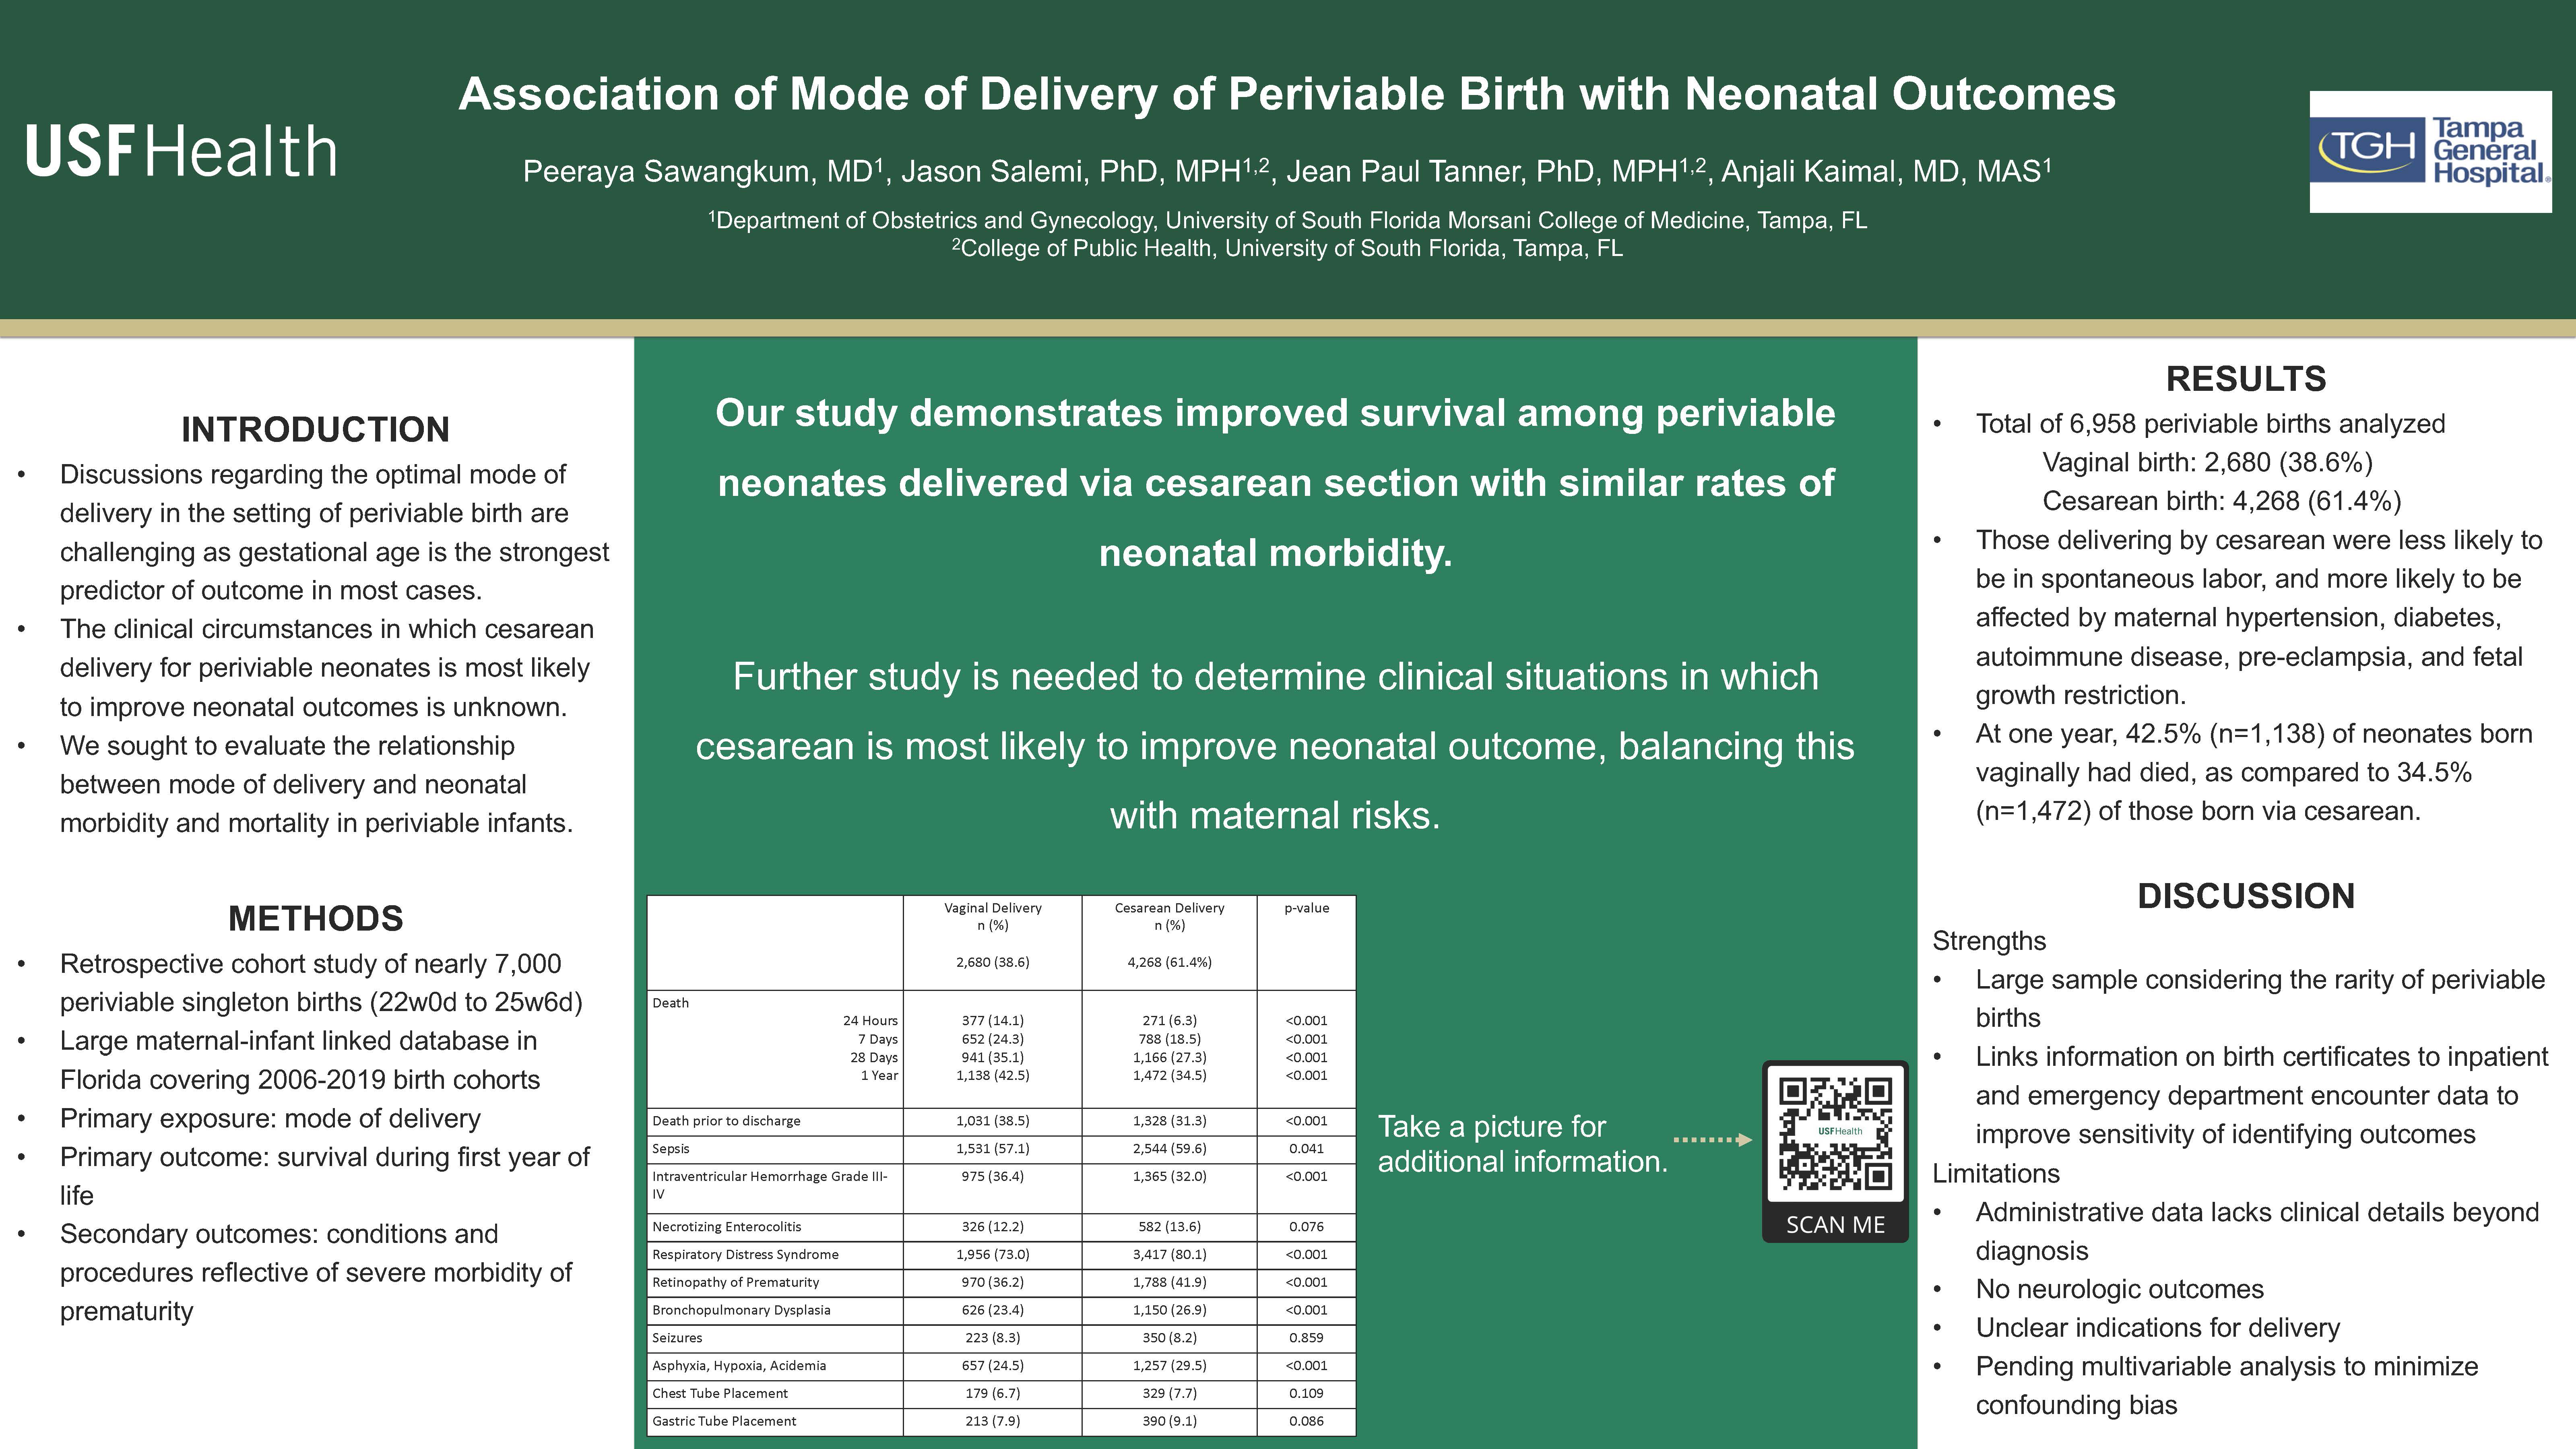 Association of Mode of Delivery of Periviable Birth with Neonatal Outcomes